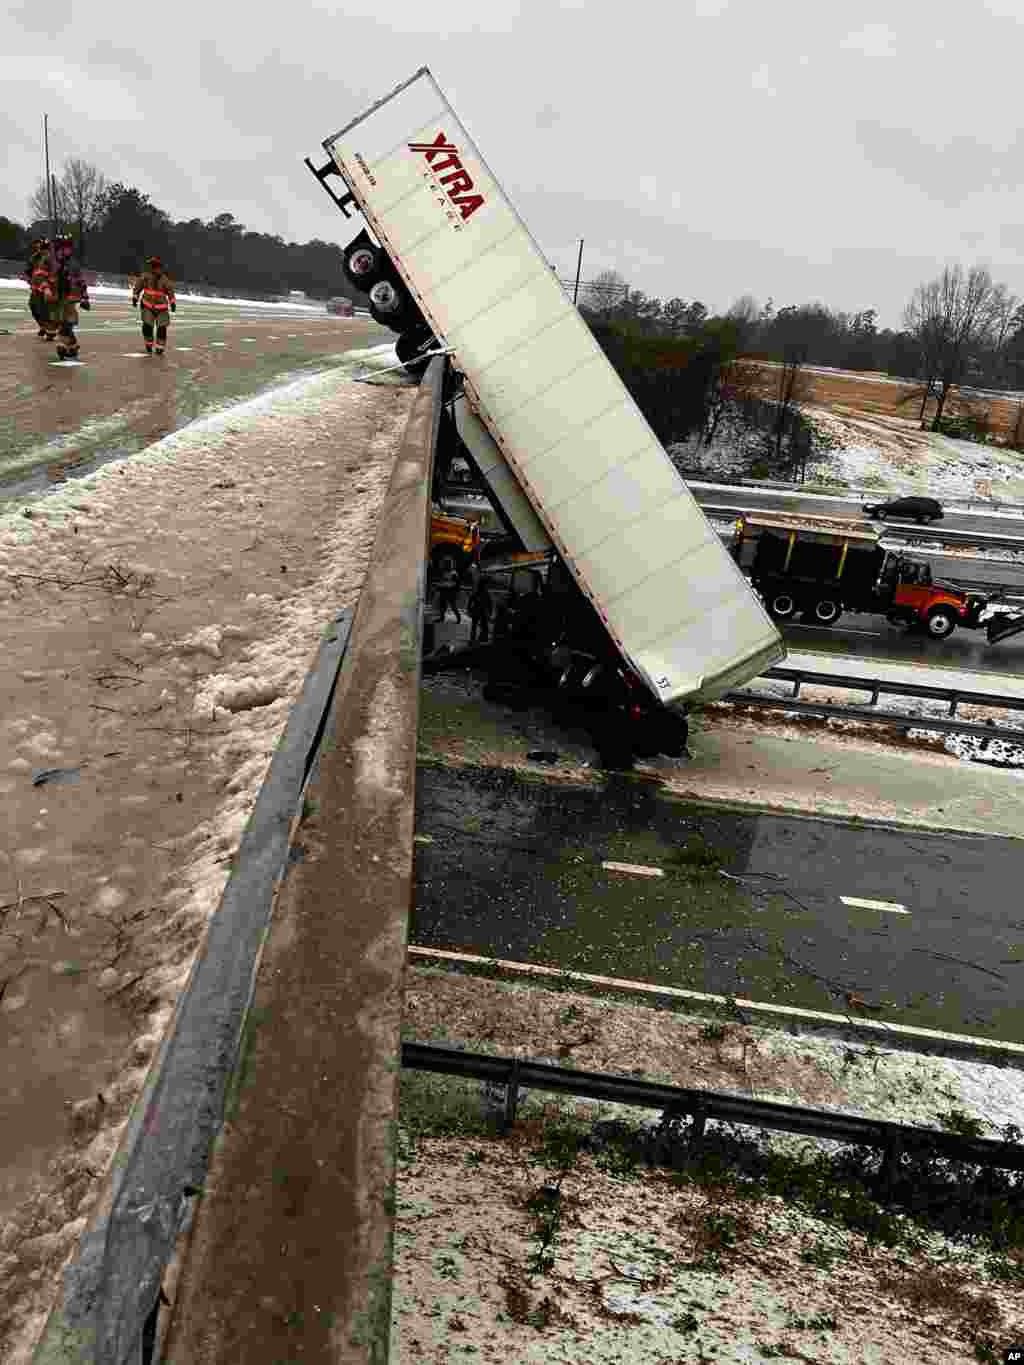 In this photo provided by the Durham Police Department, a truck hangs from the highway N.C. 147 overpass after its cab apparently slid off the highway during winter weather, Jan. 16, 2022, in Durham, North Carolina.